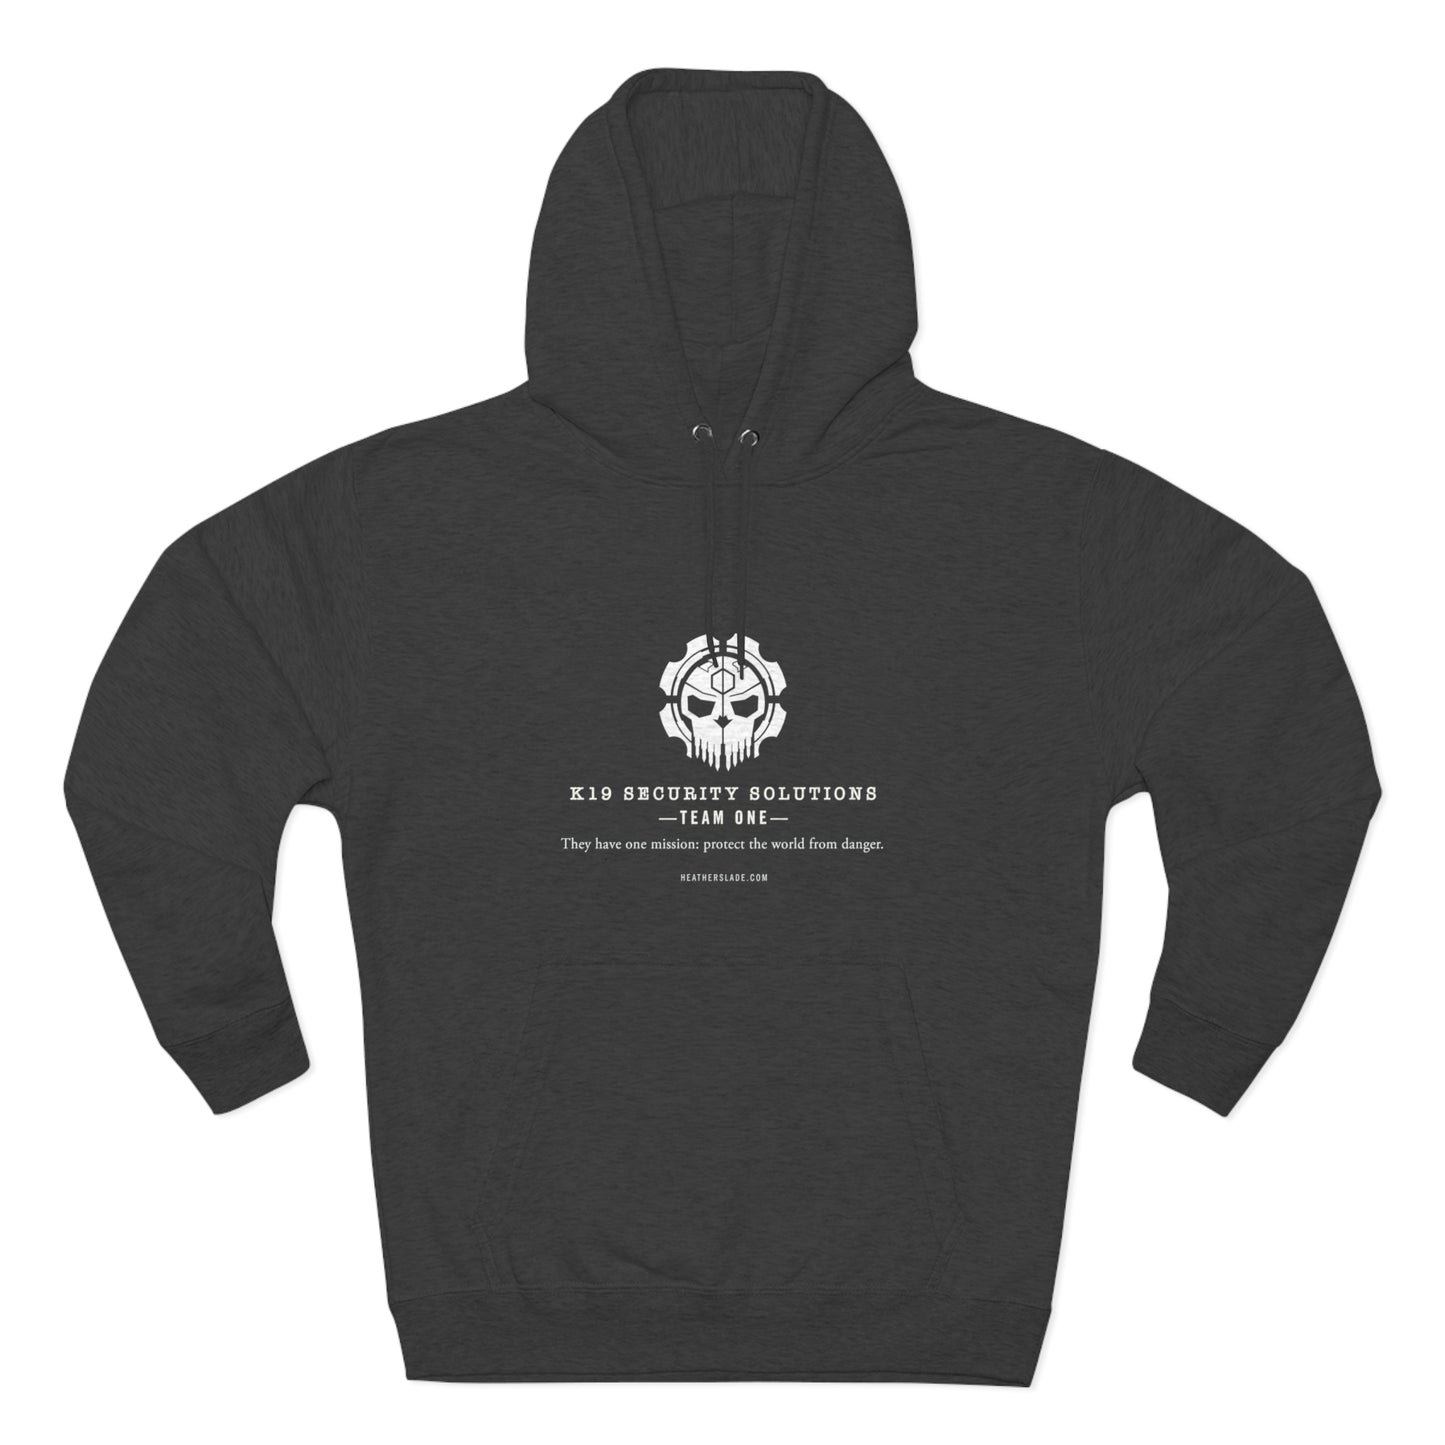 K19 Security Solutions Team One Pullover Hoodie